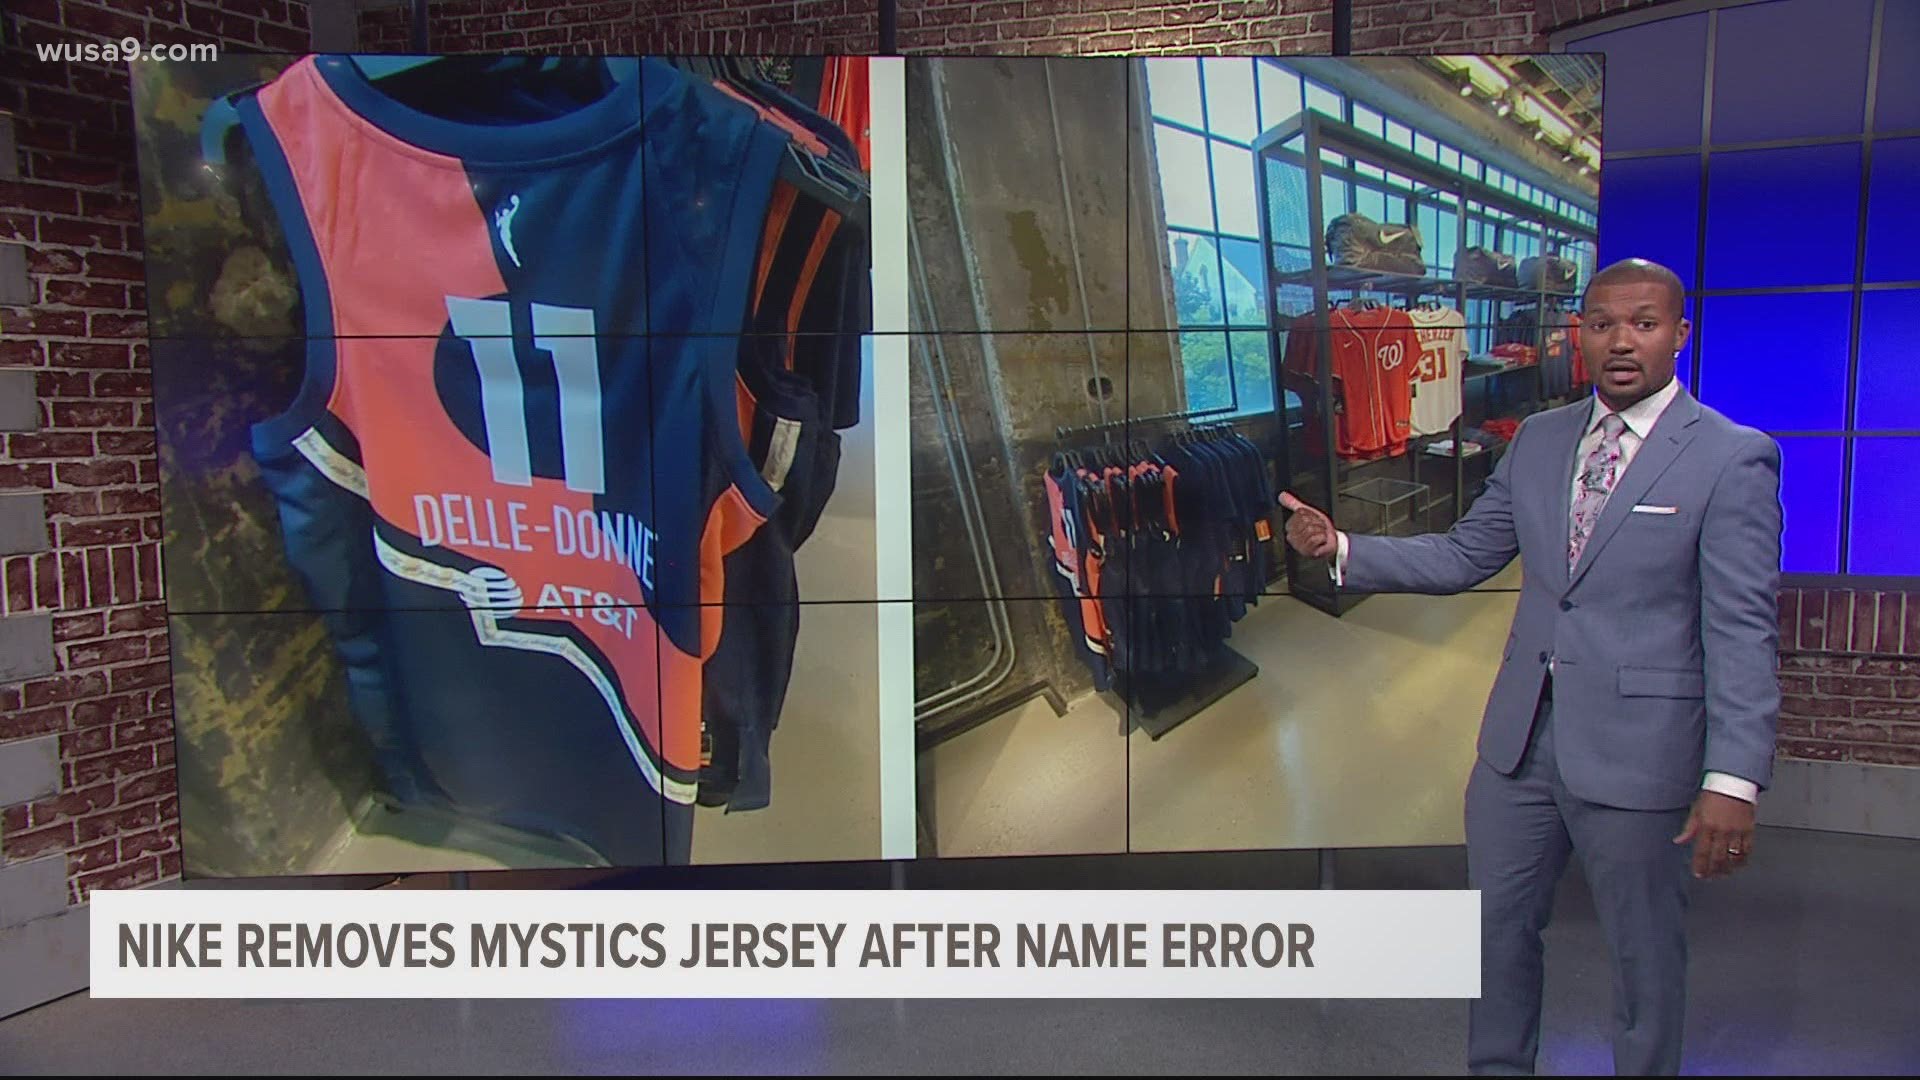 WNBA New Jerseys for Mystics Leaked With Star's Last Name Misspelled